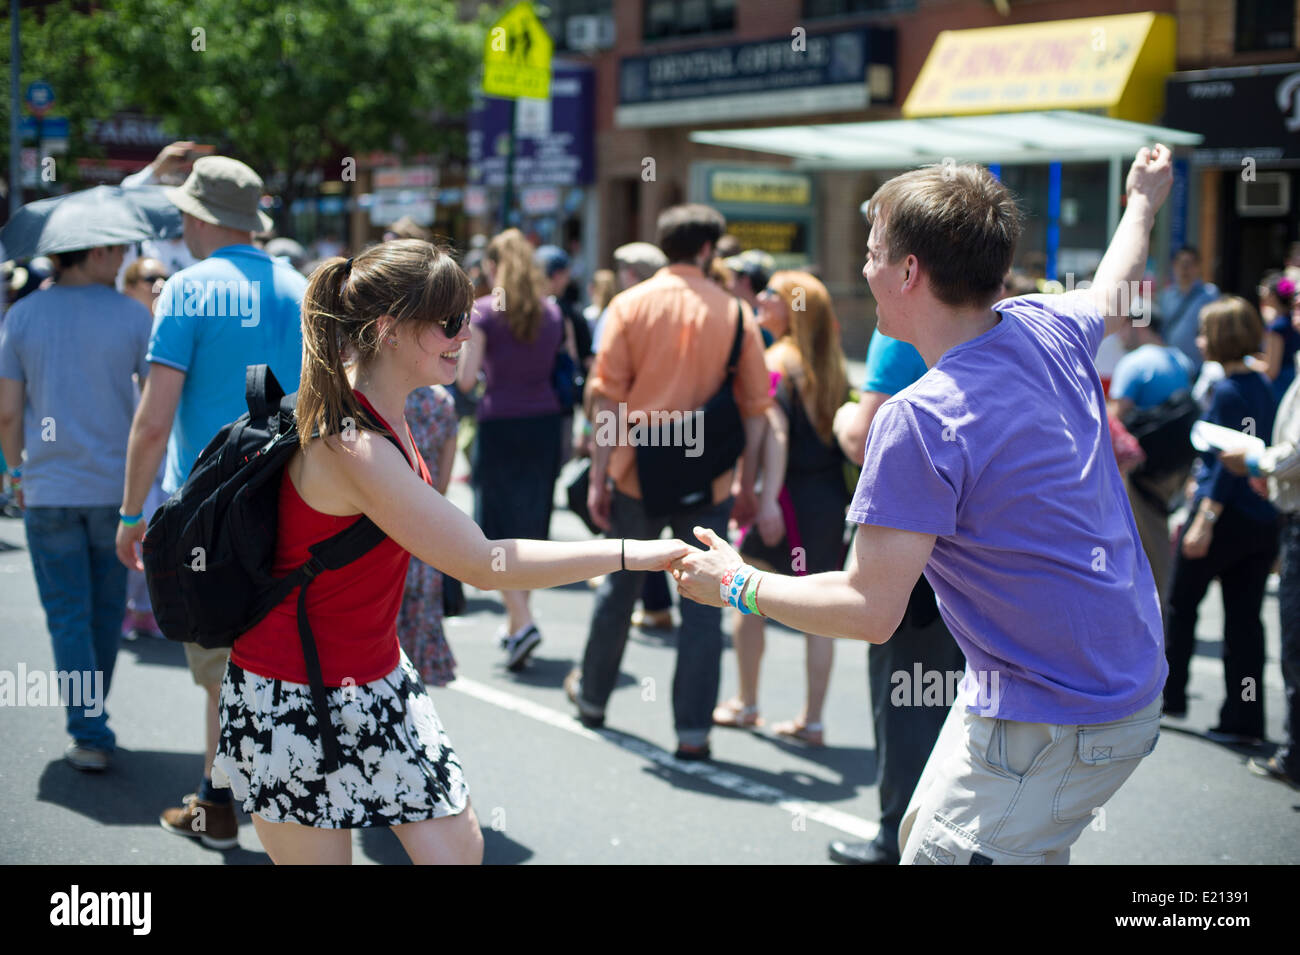 Hundreds of Lindy Hop enthusiasts converge on Harlem in New York Stock Photo